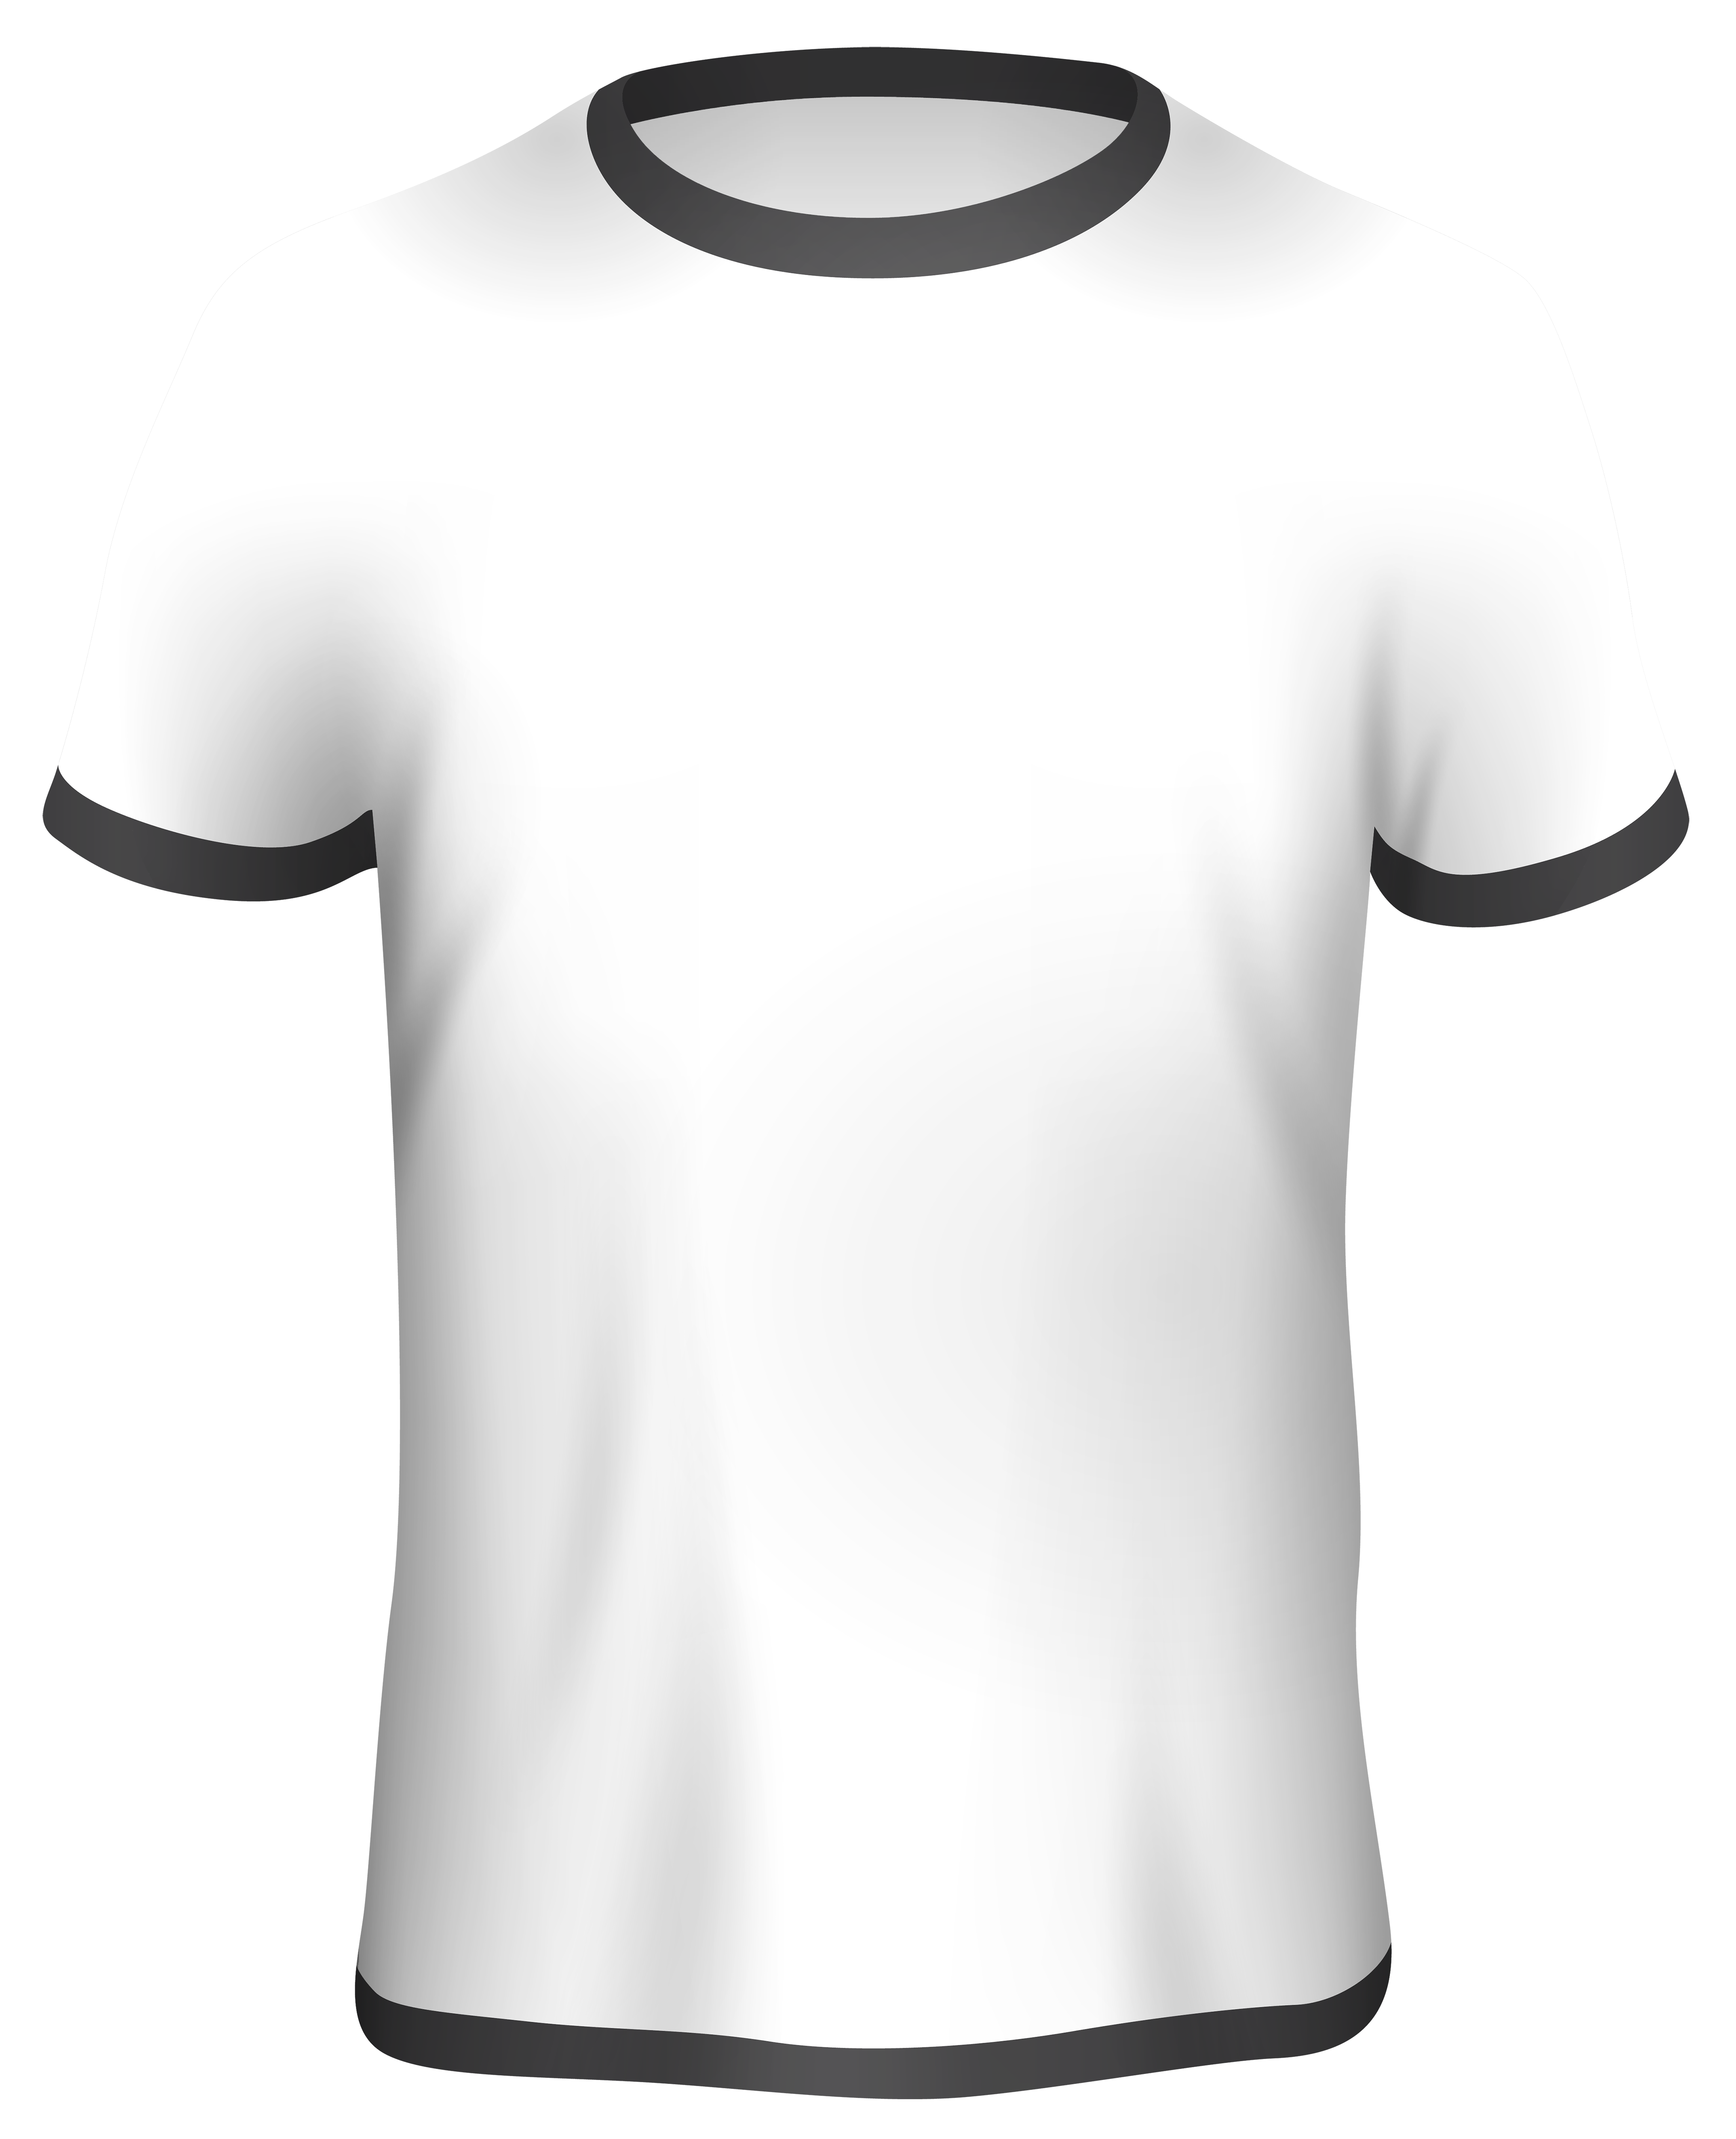 Download T Shirt Mockup White Png - Free Layered SVG Files - Free Download Mockups PSD.Download now and ...